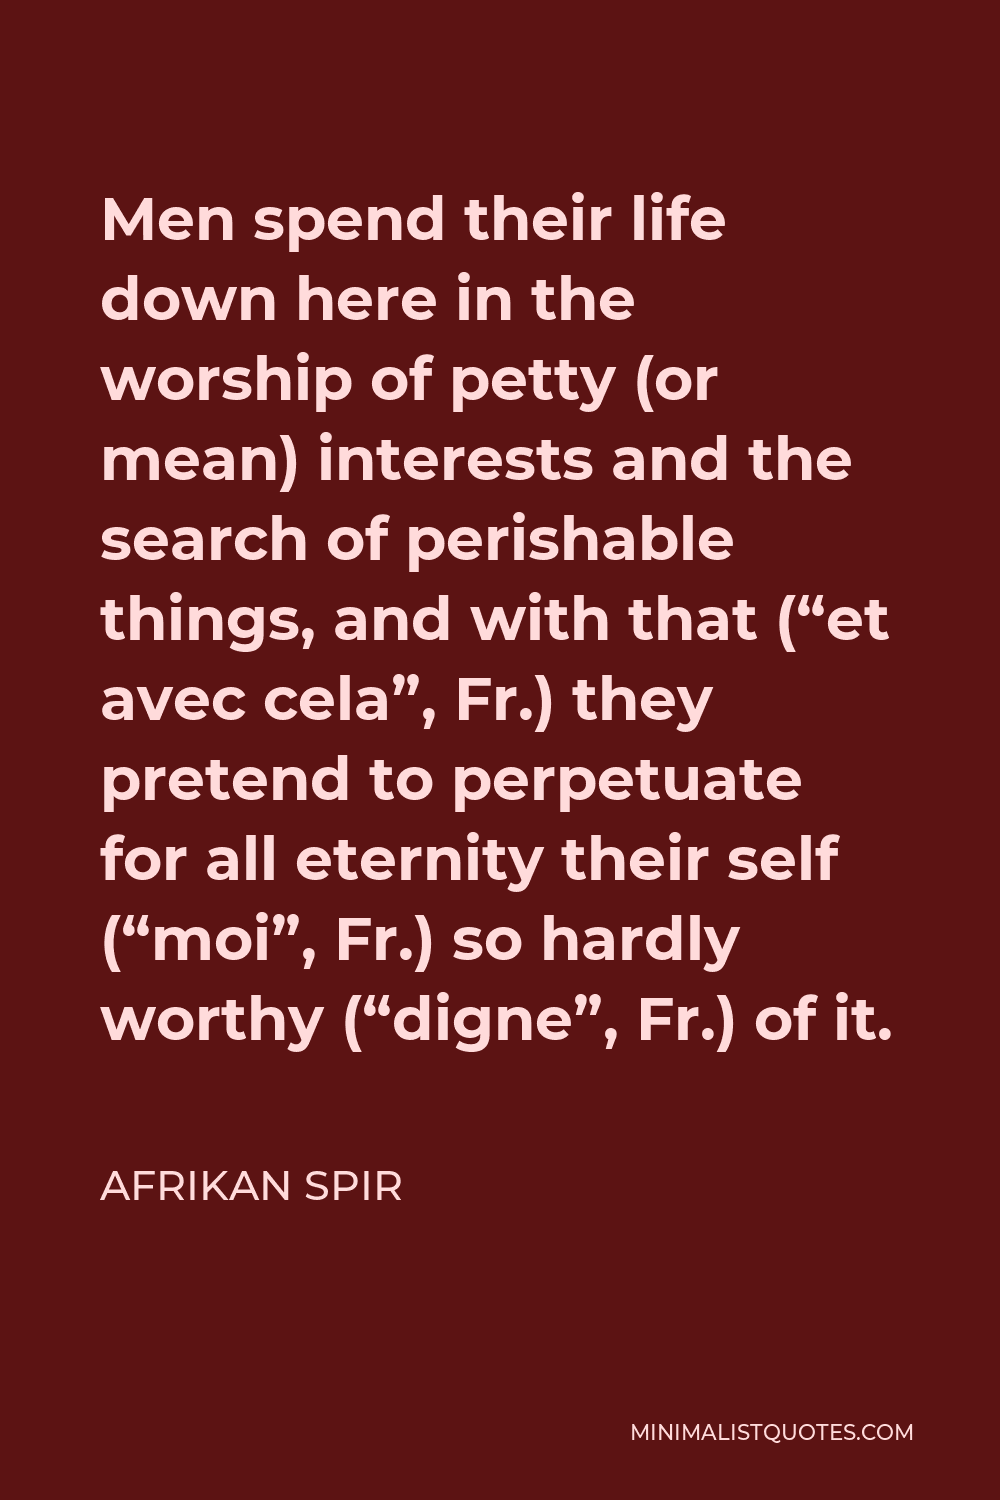 Afrikan Spir Quote - Men spend their life down here in the worship of petty (or mean) interests and the search of perishable things, and with that (“et avec cela”, Fr.) they pretend to perpetuate for all eternity their self (“moi”, Fr.) so hardly worthy (“digne”, Fr.) of it.